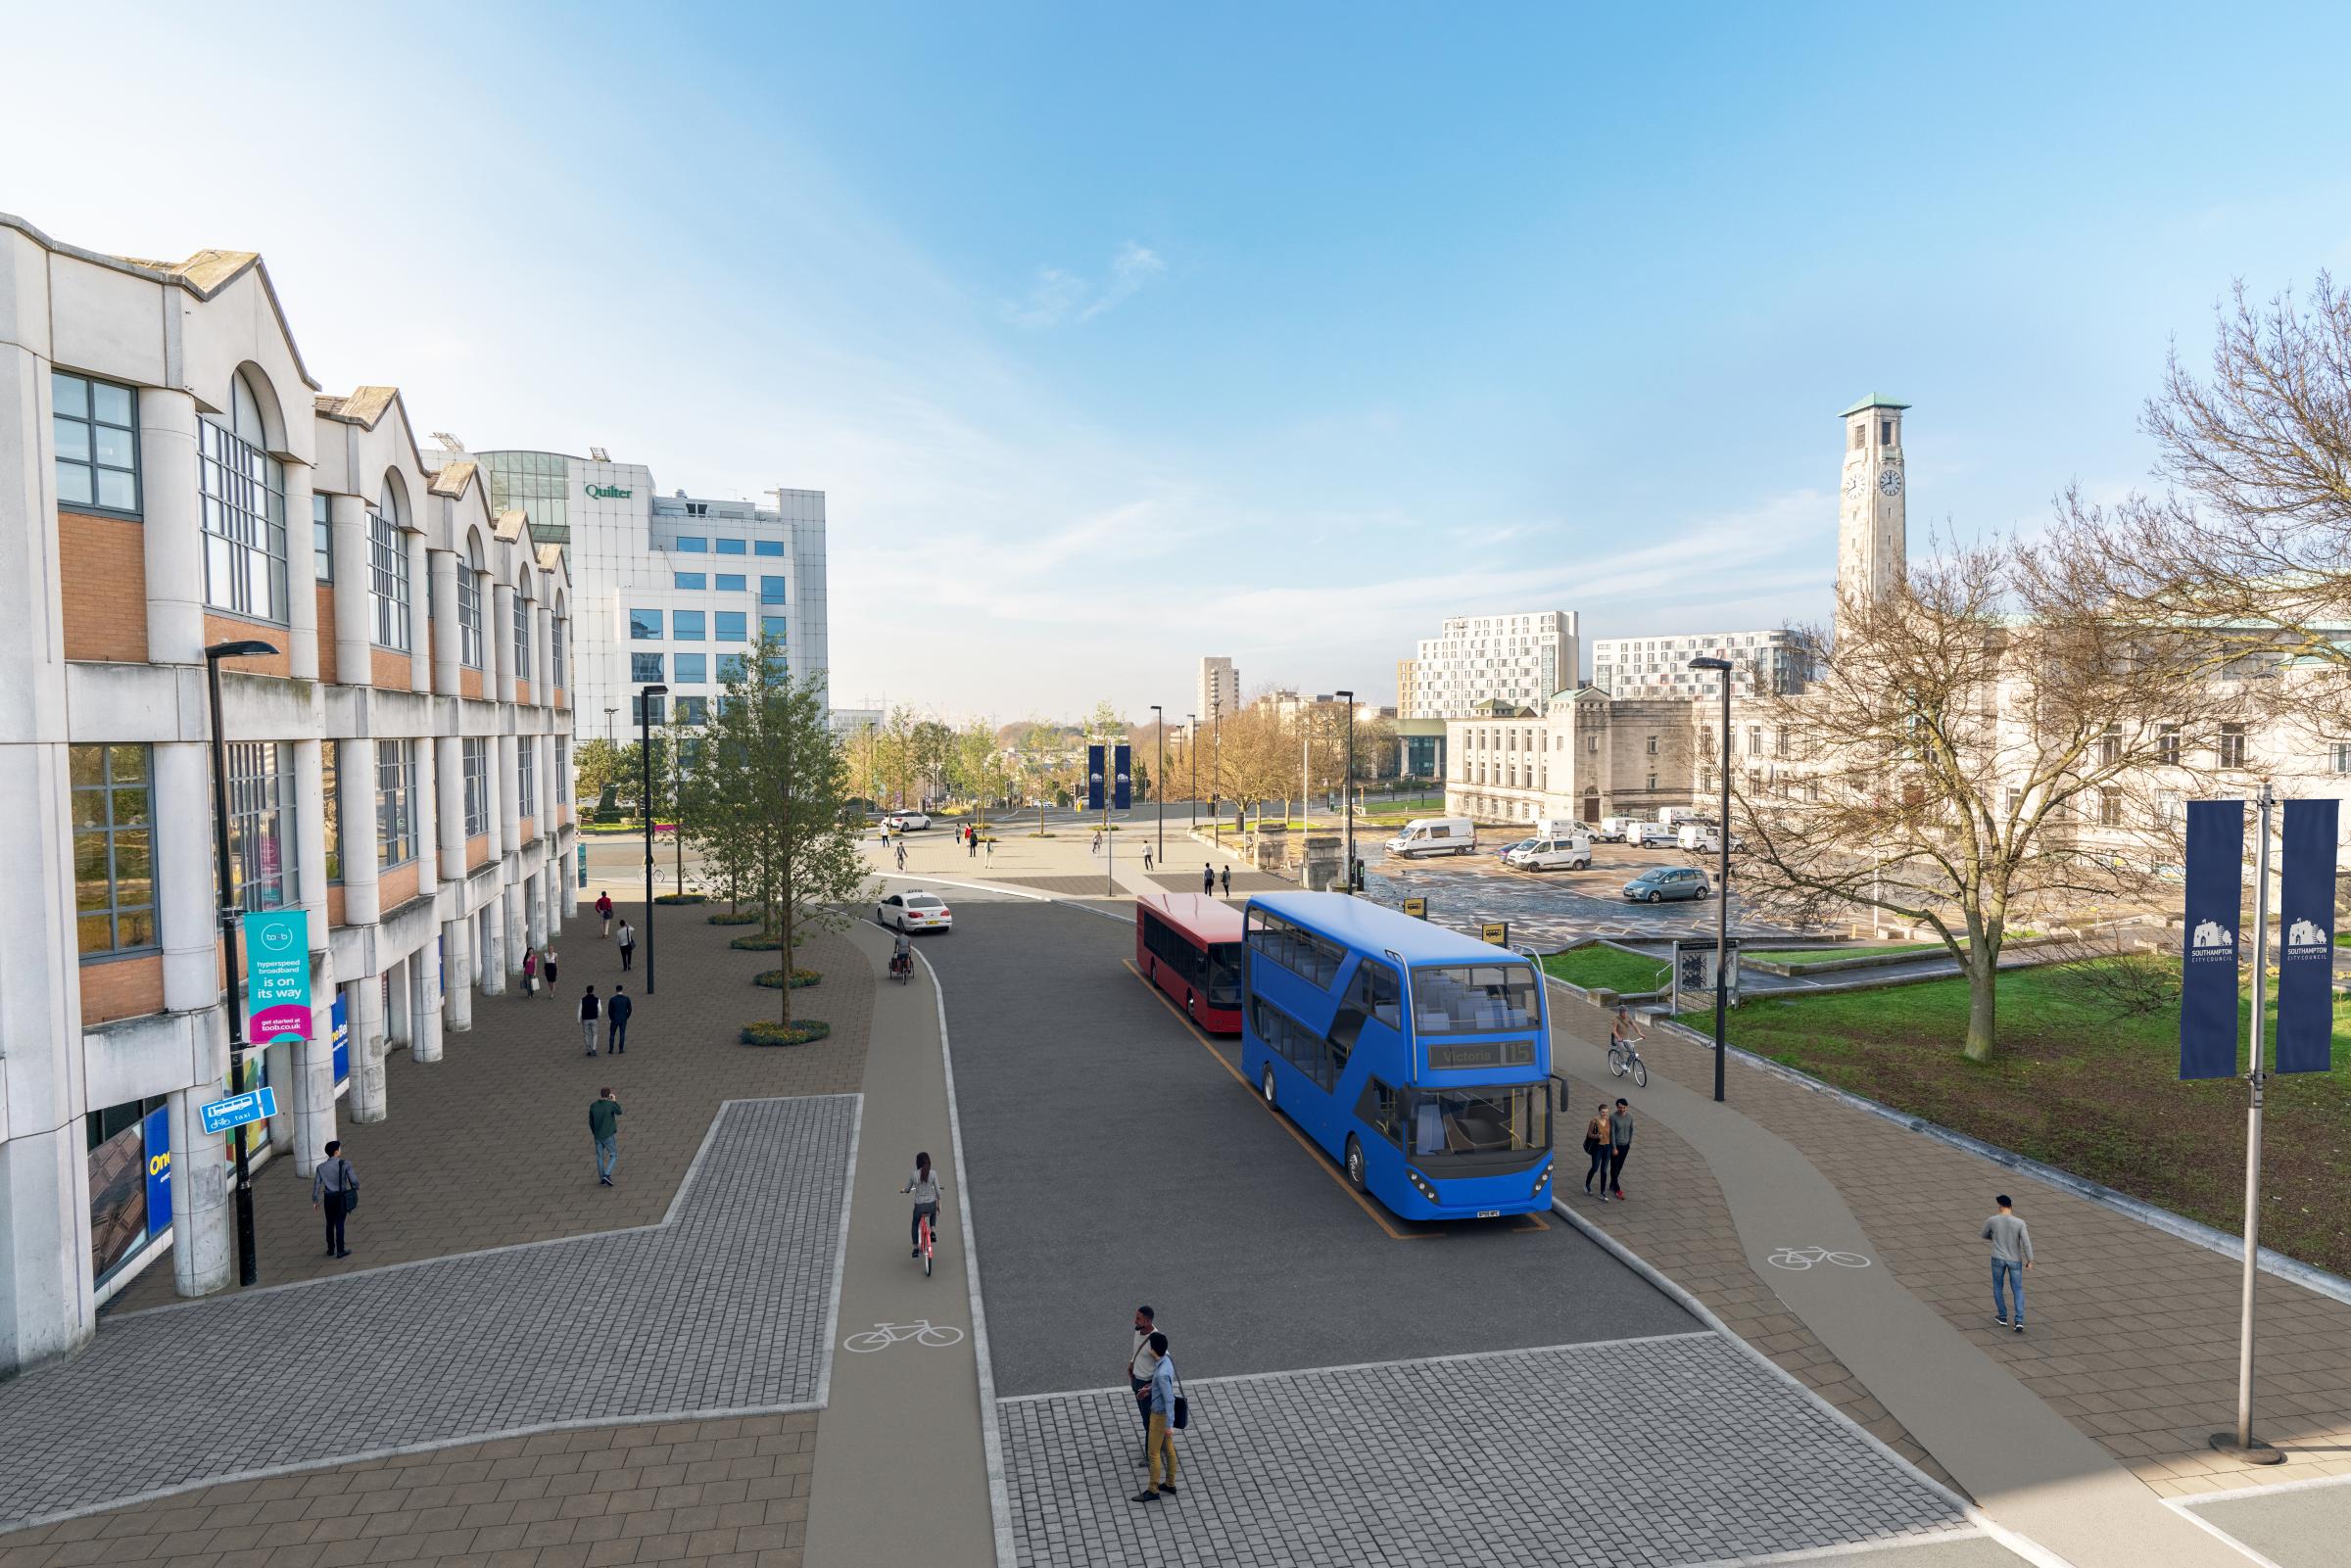 Another angle of how Civic Centre Place could look